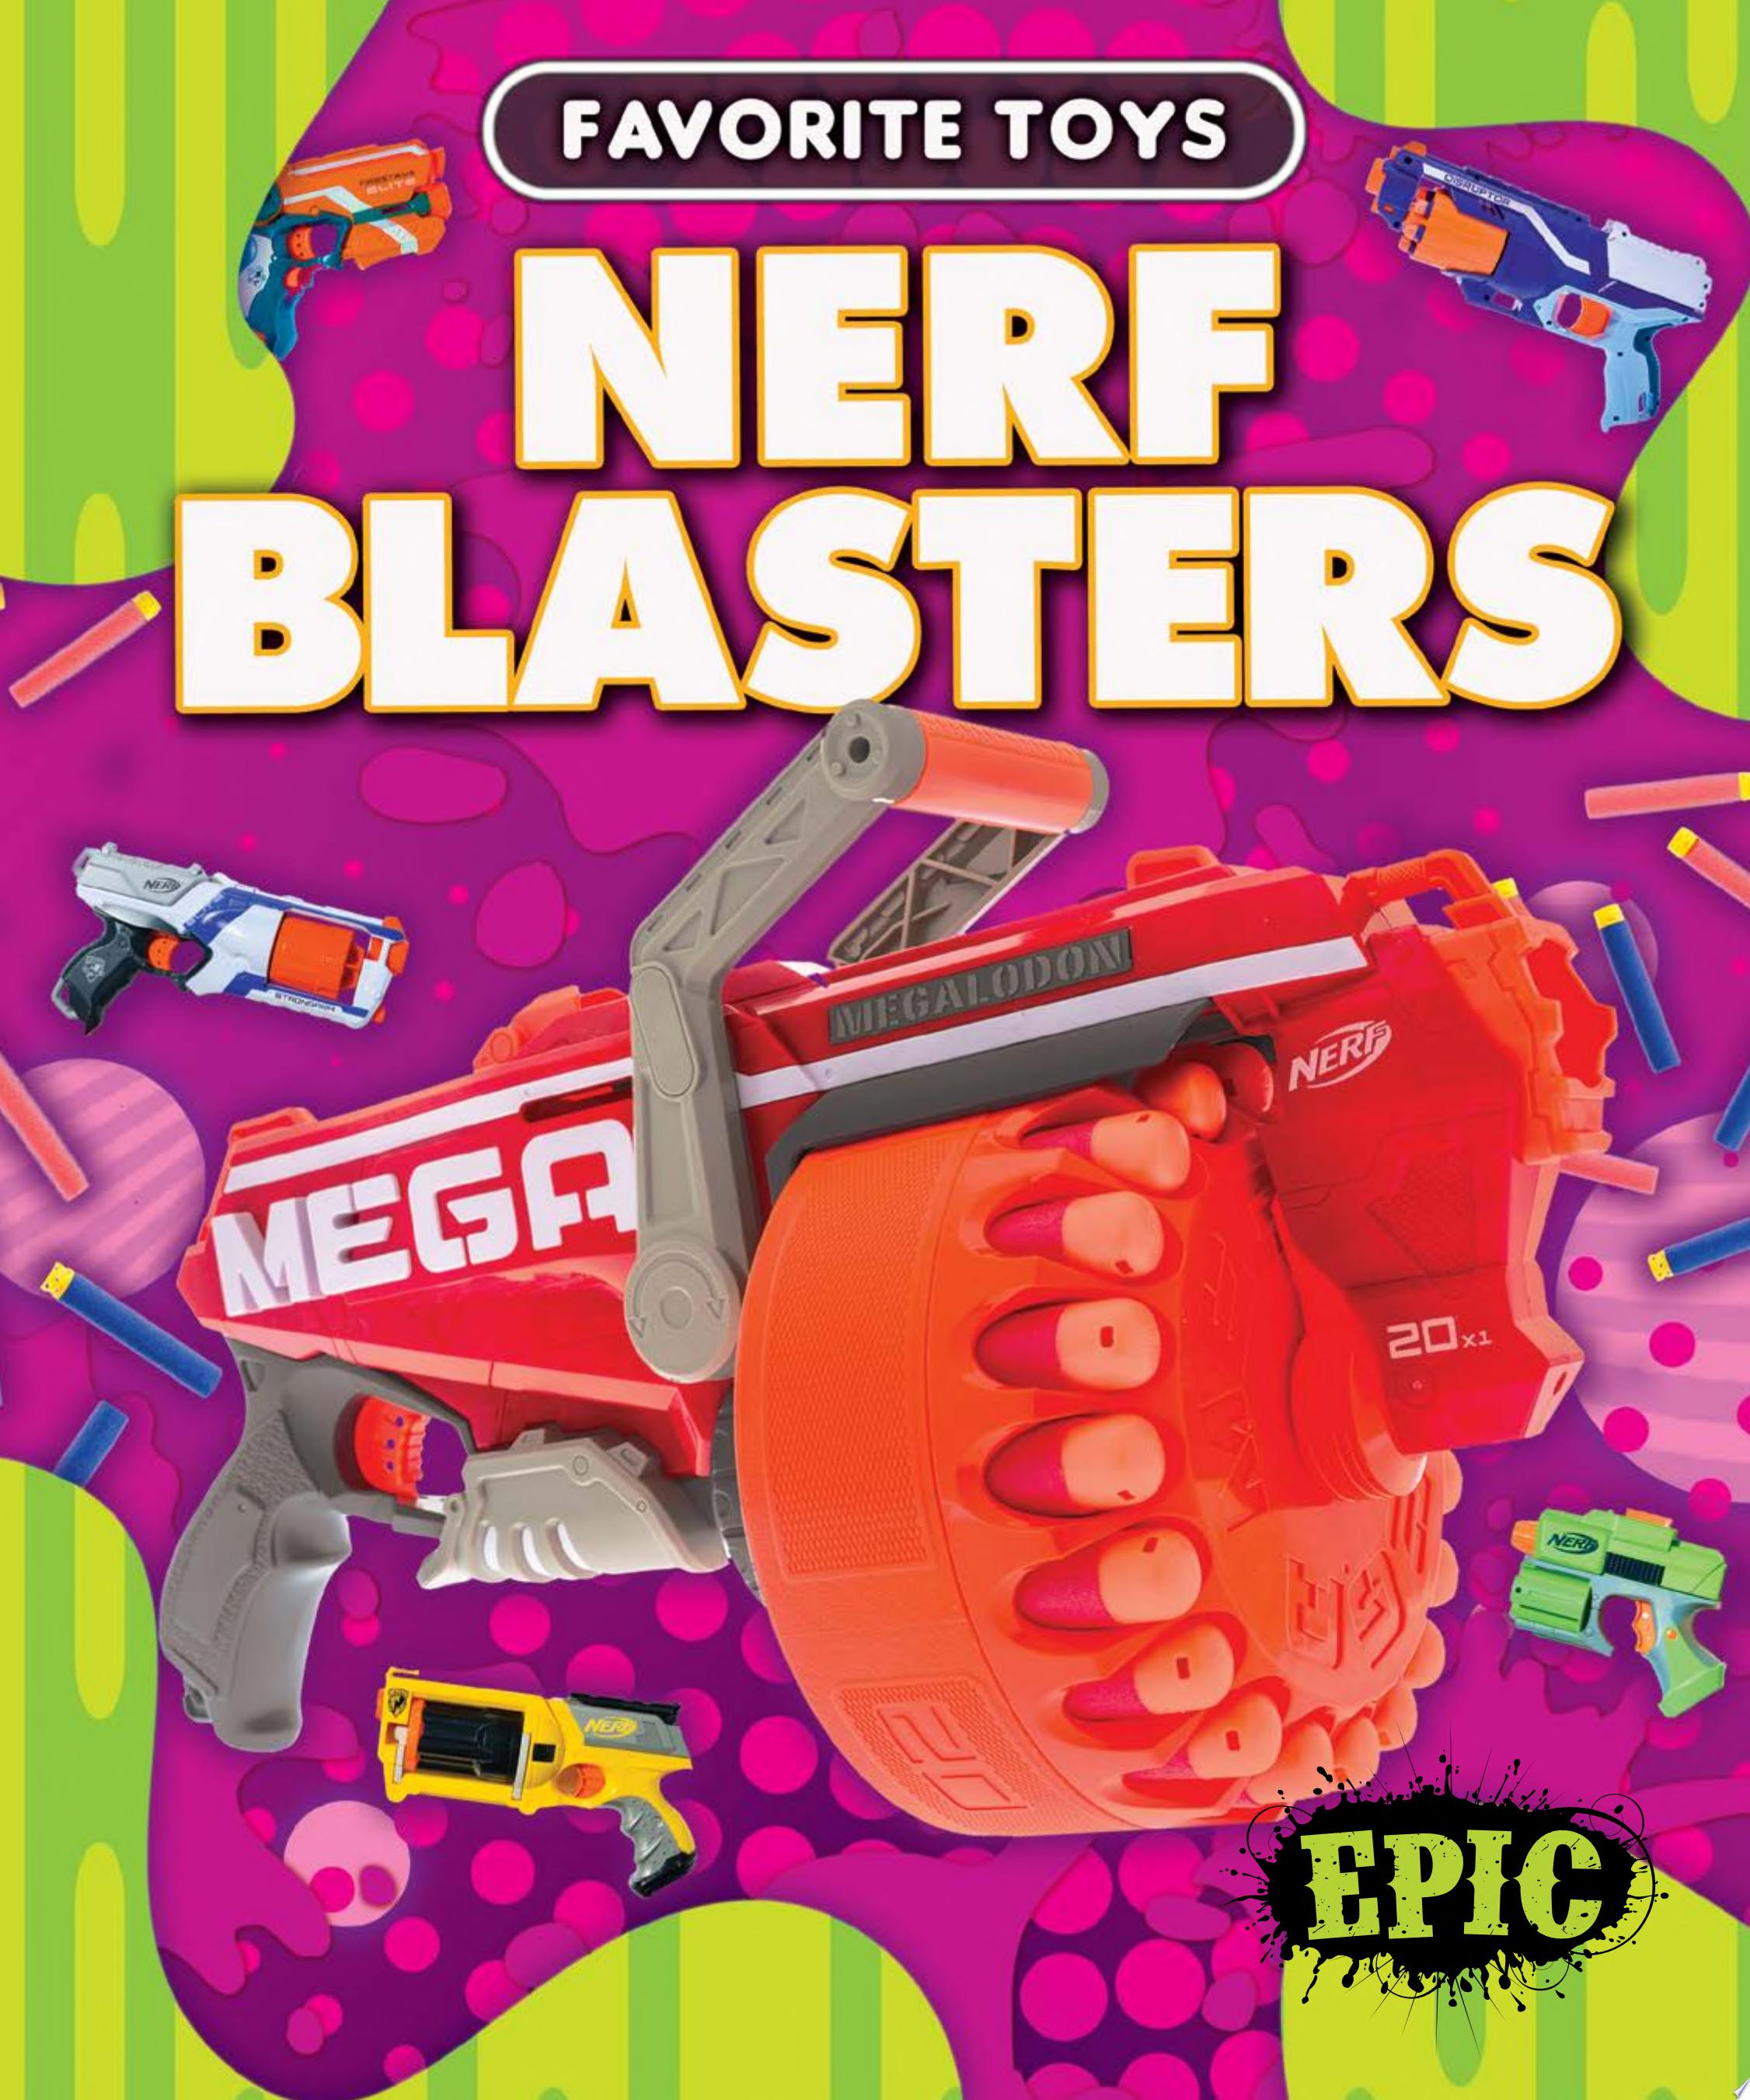 Image for "Nerf Blasters"